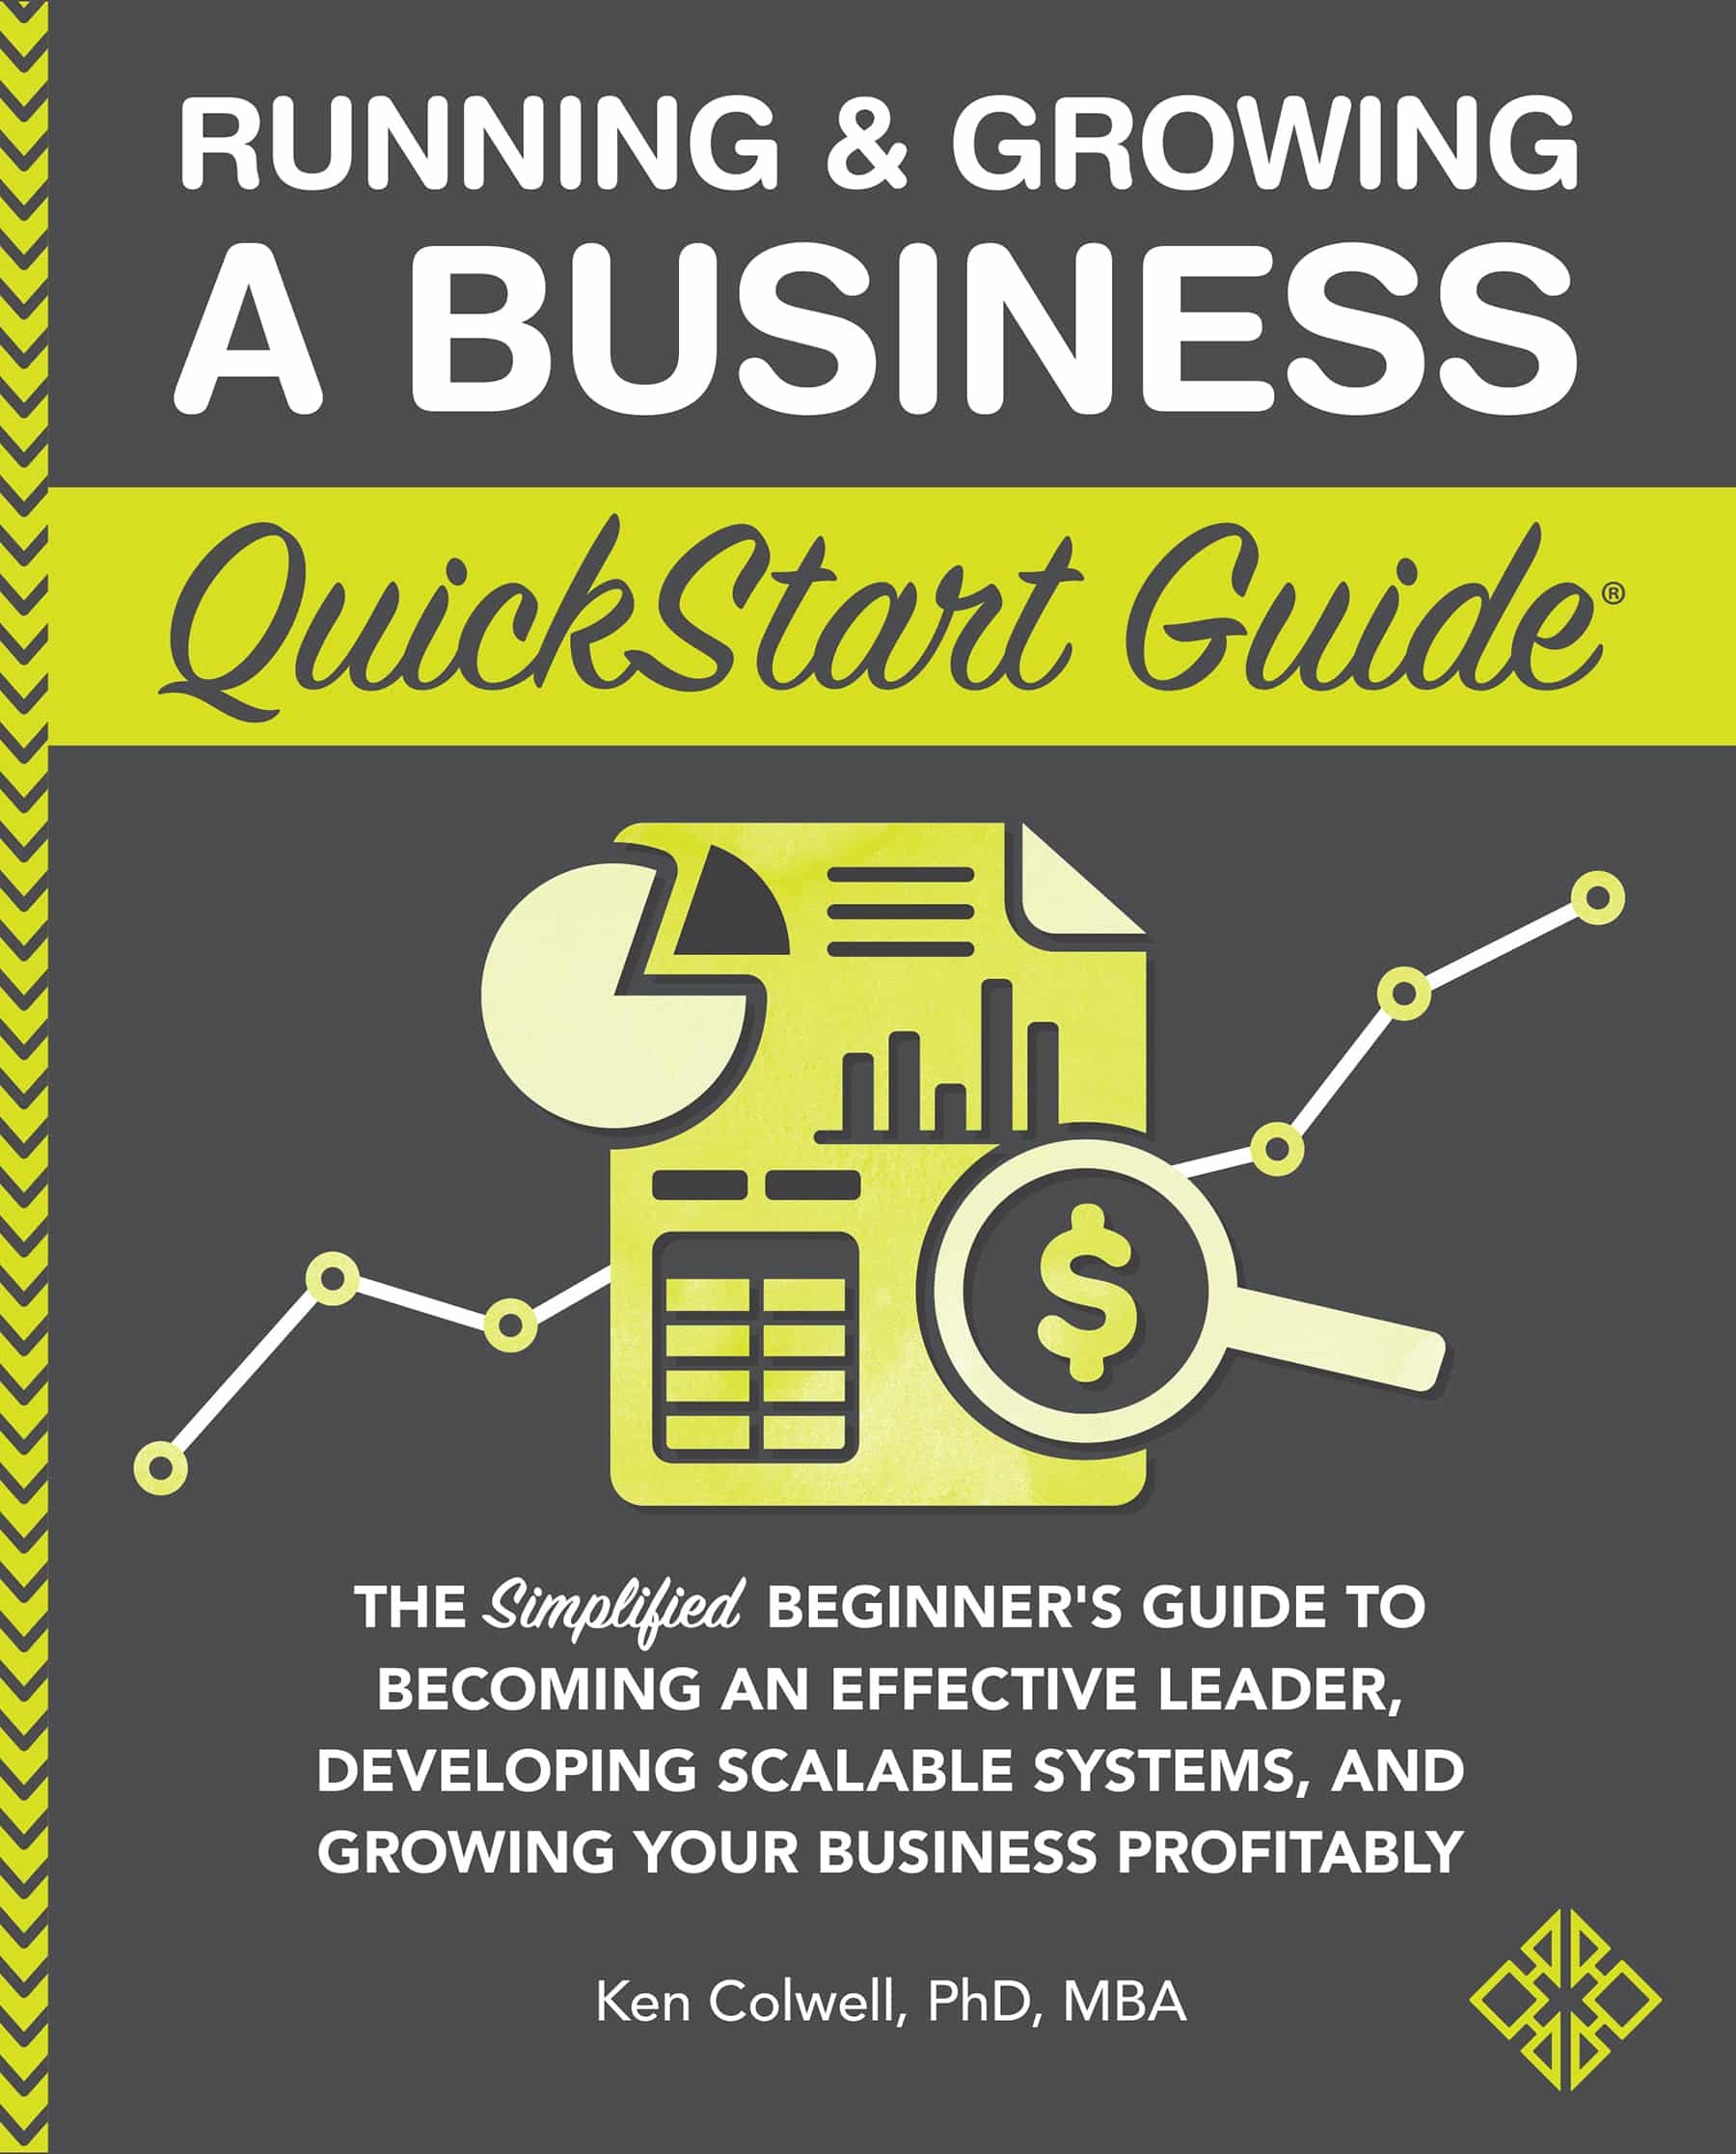 cover of running and growing a business quickstart guide